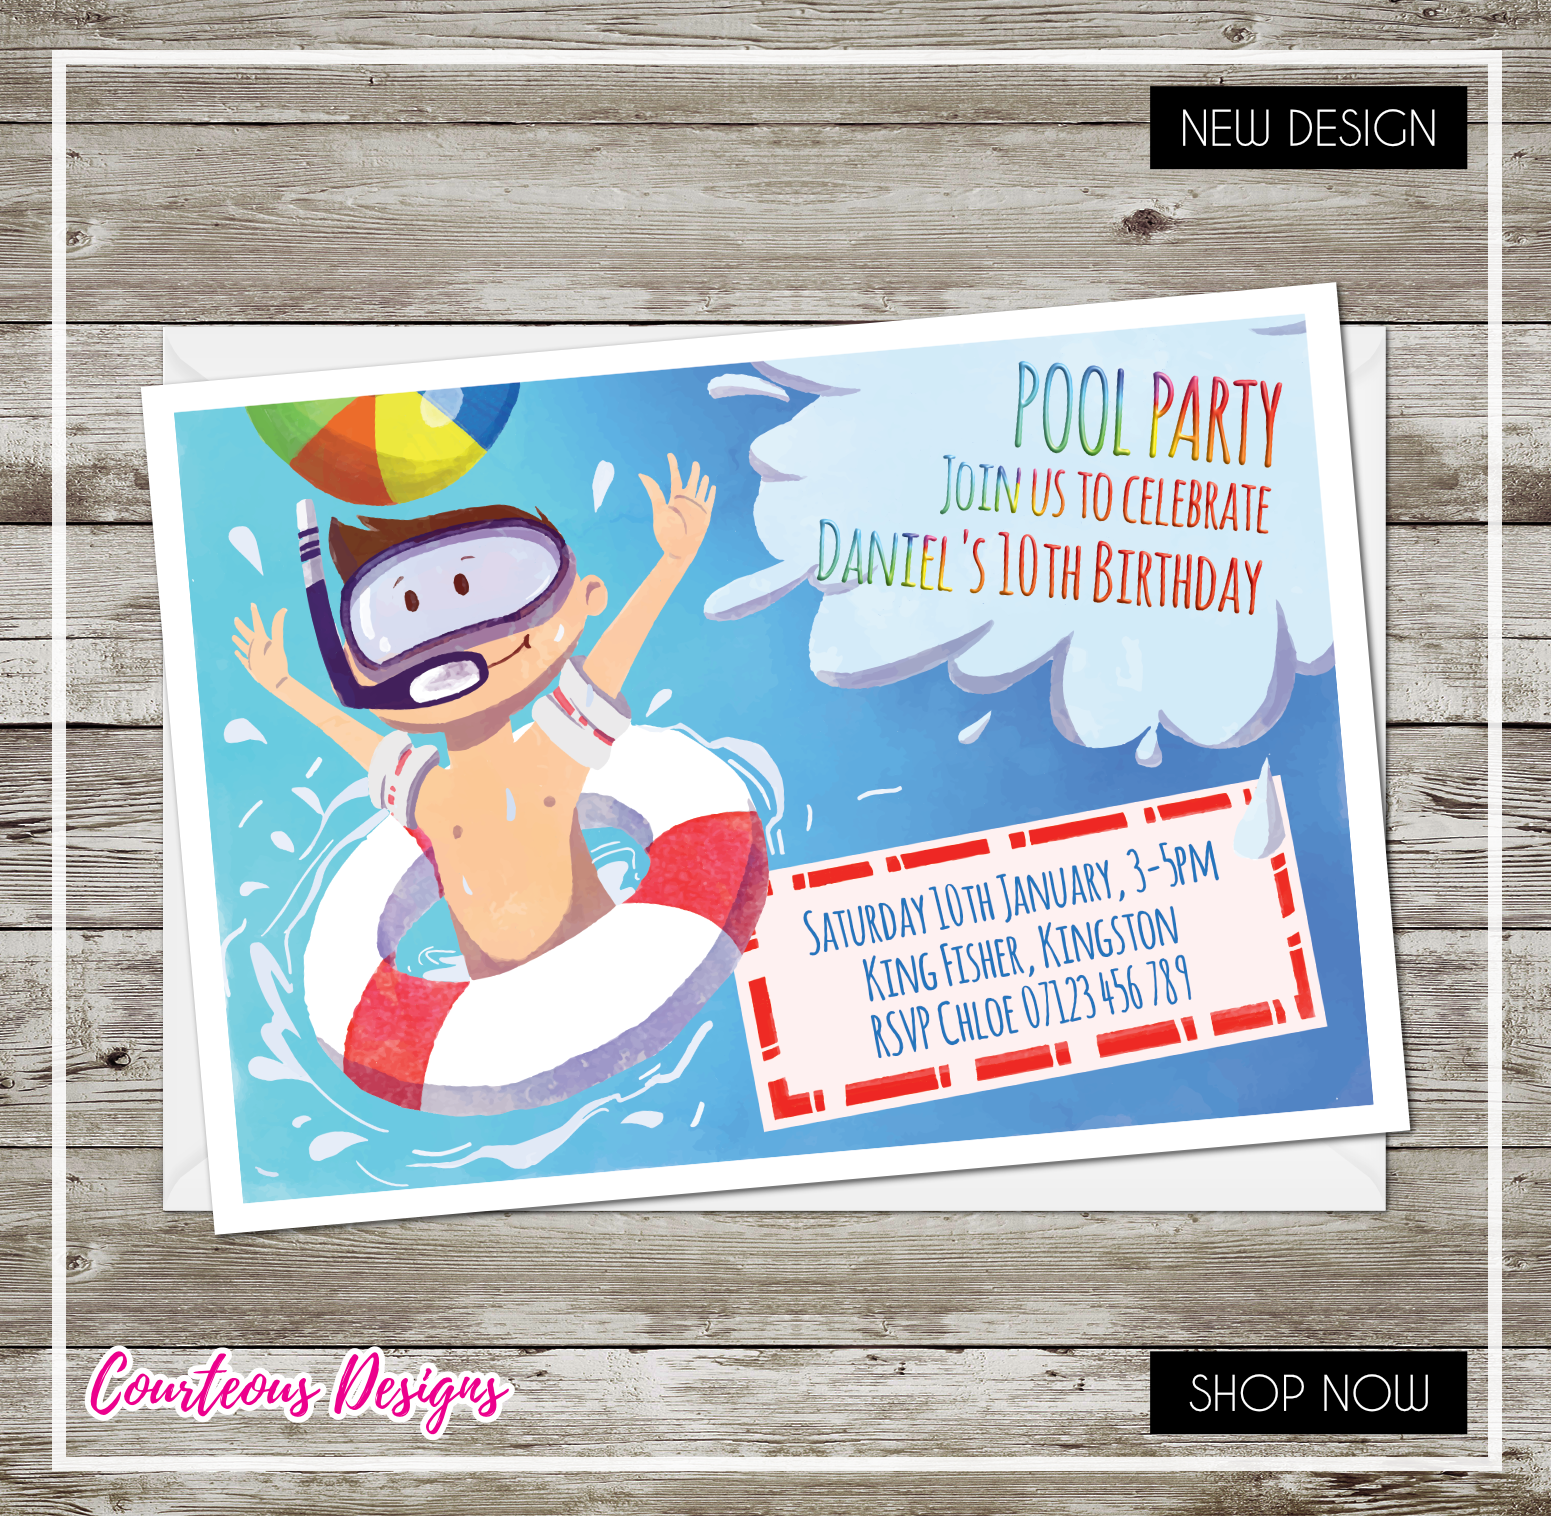 Pool Party Design